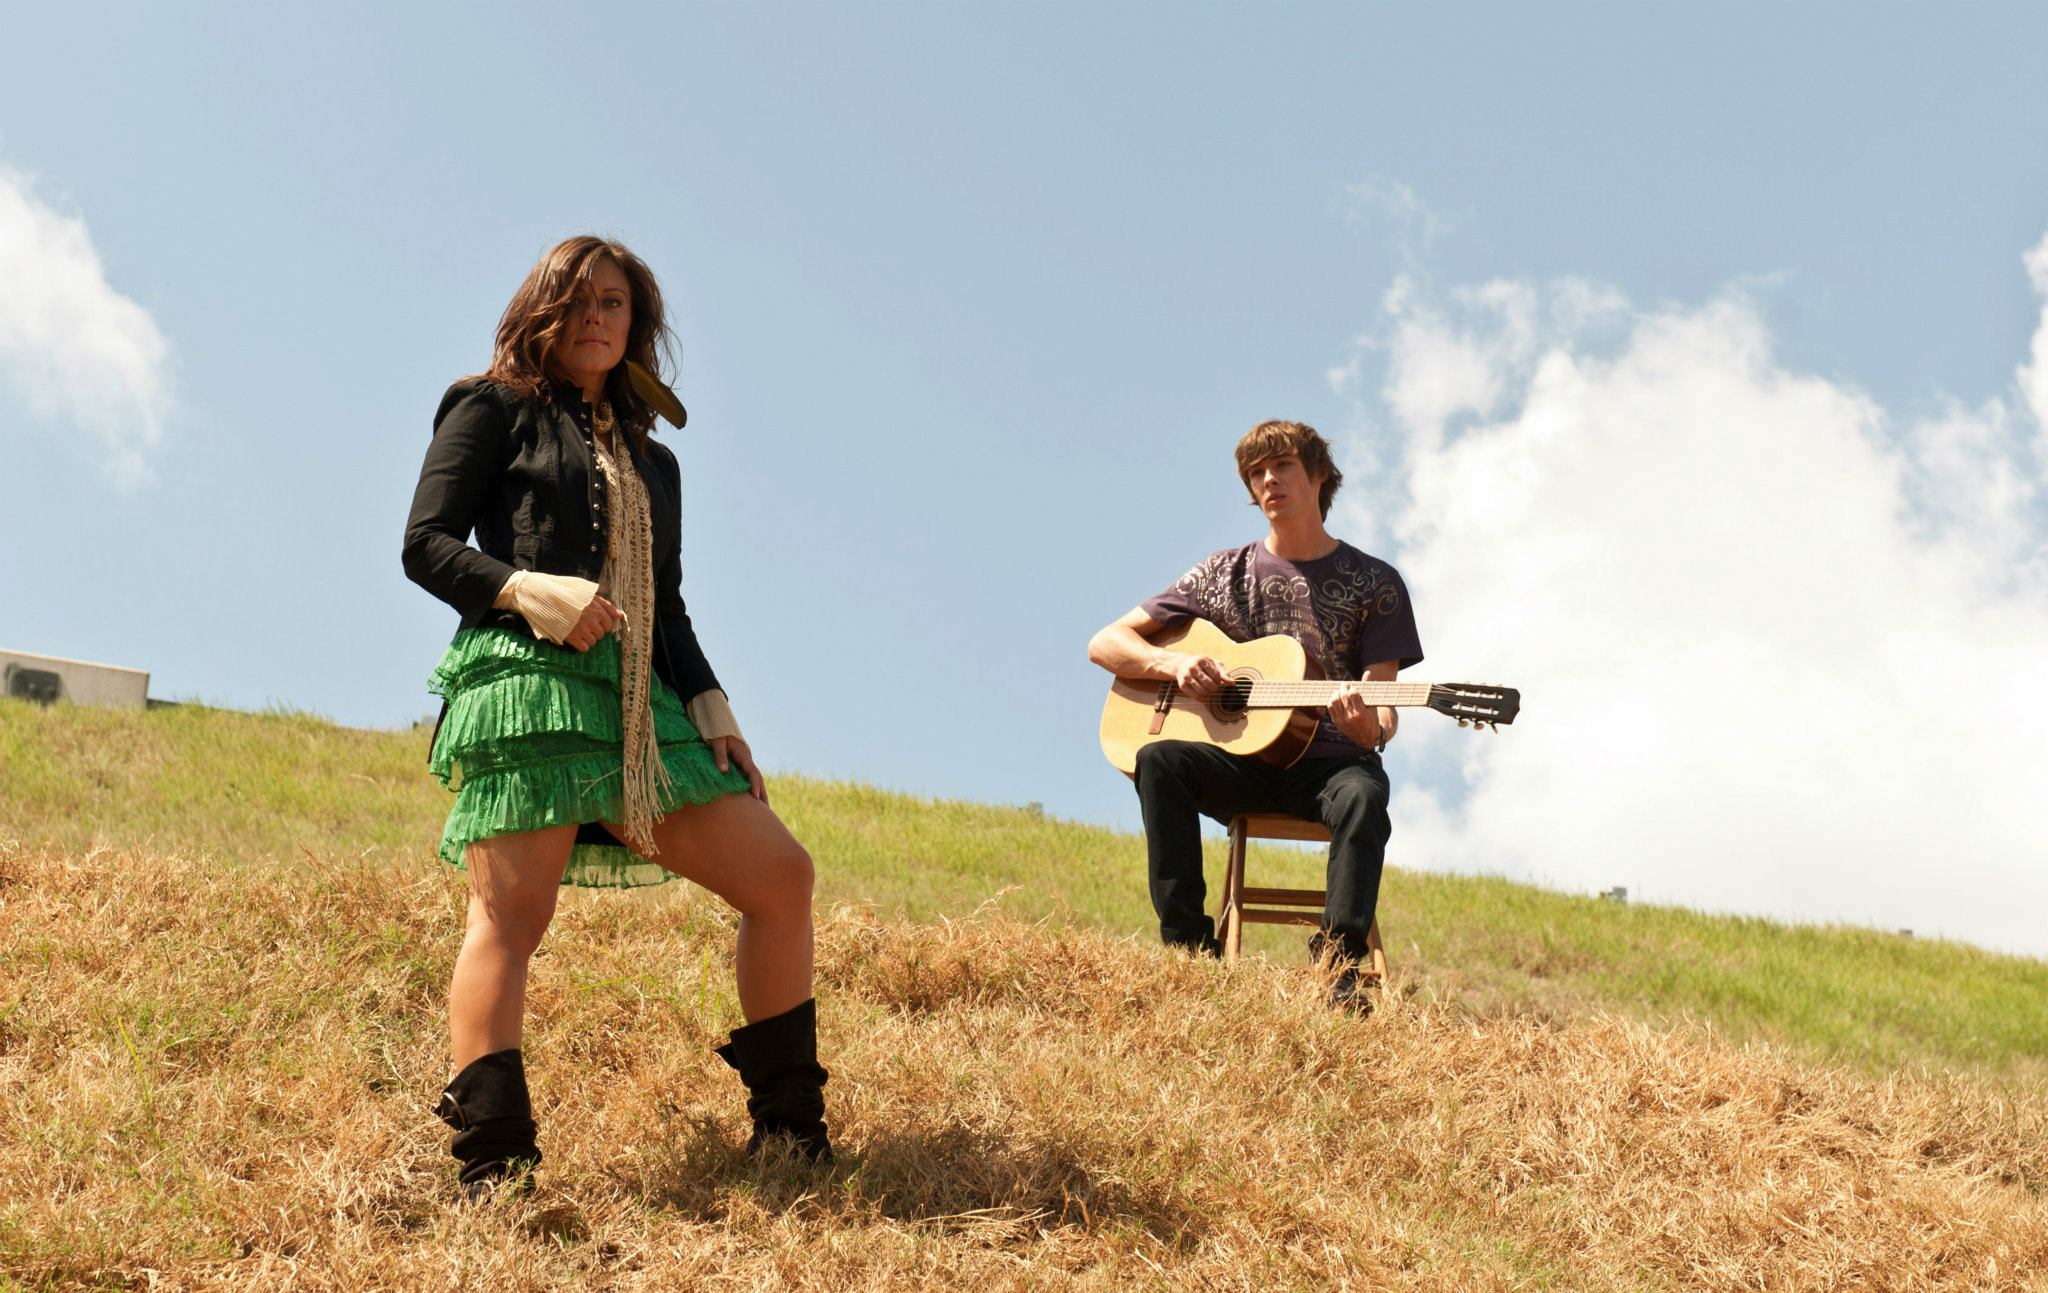 Man and woman standing on a hill. Man is holding a guitar.